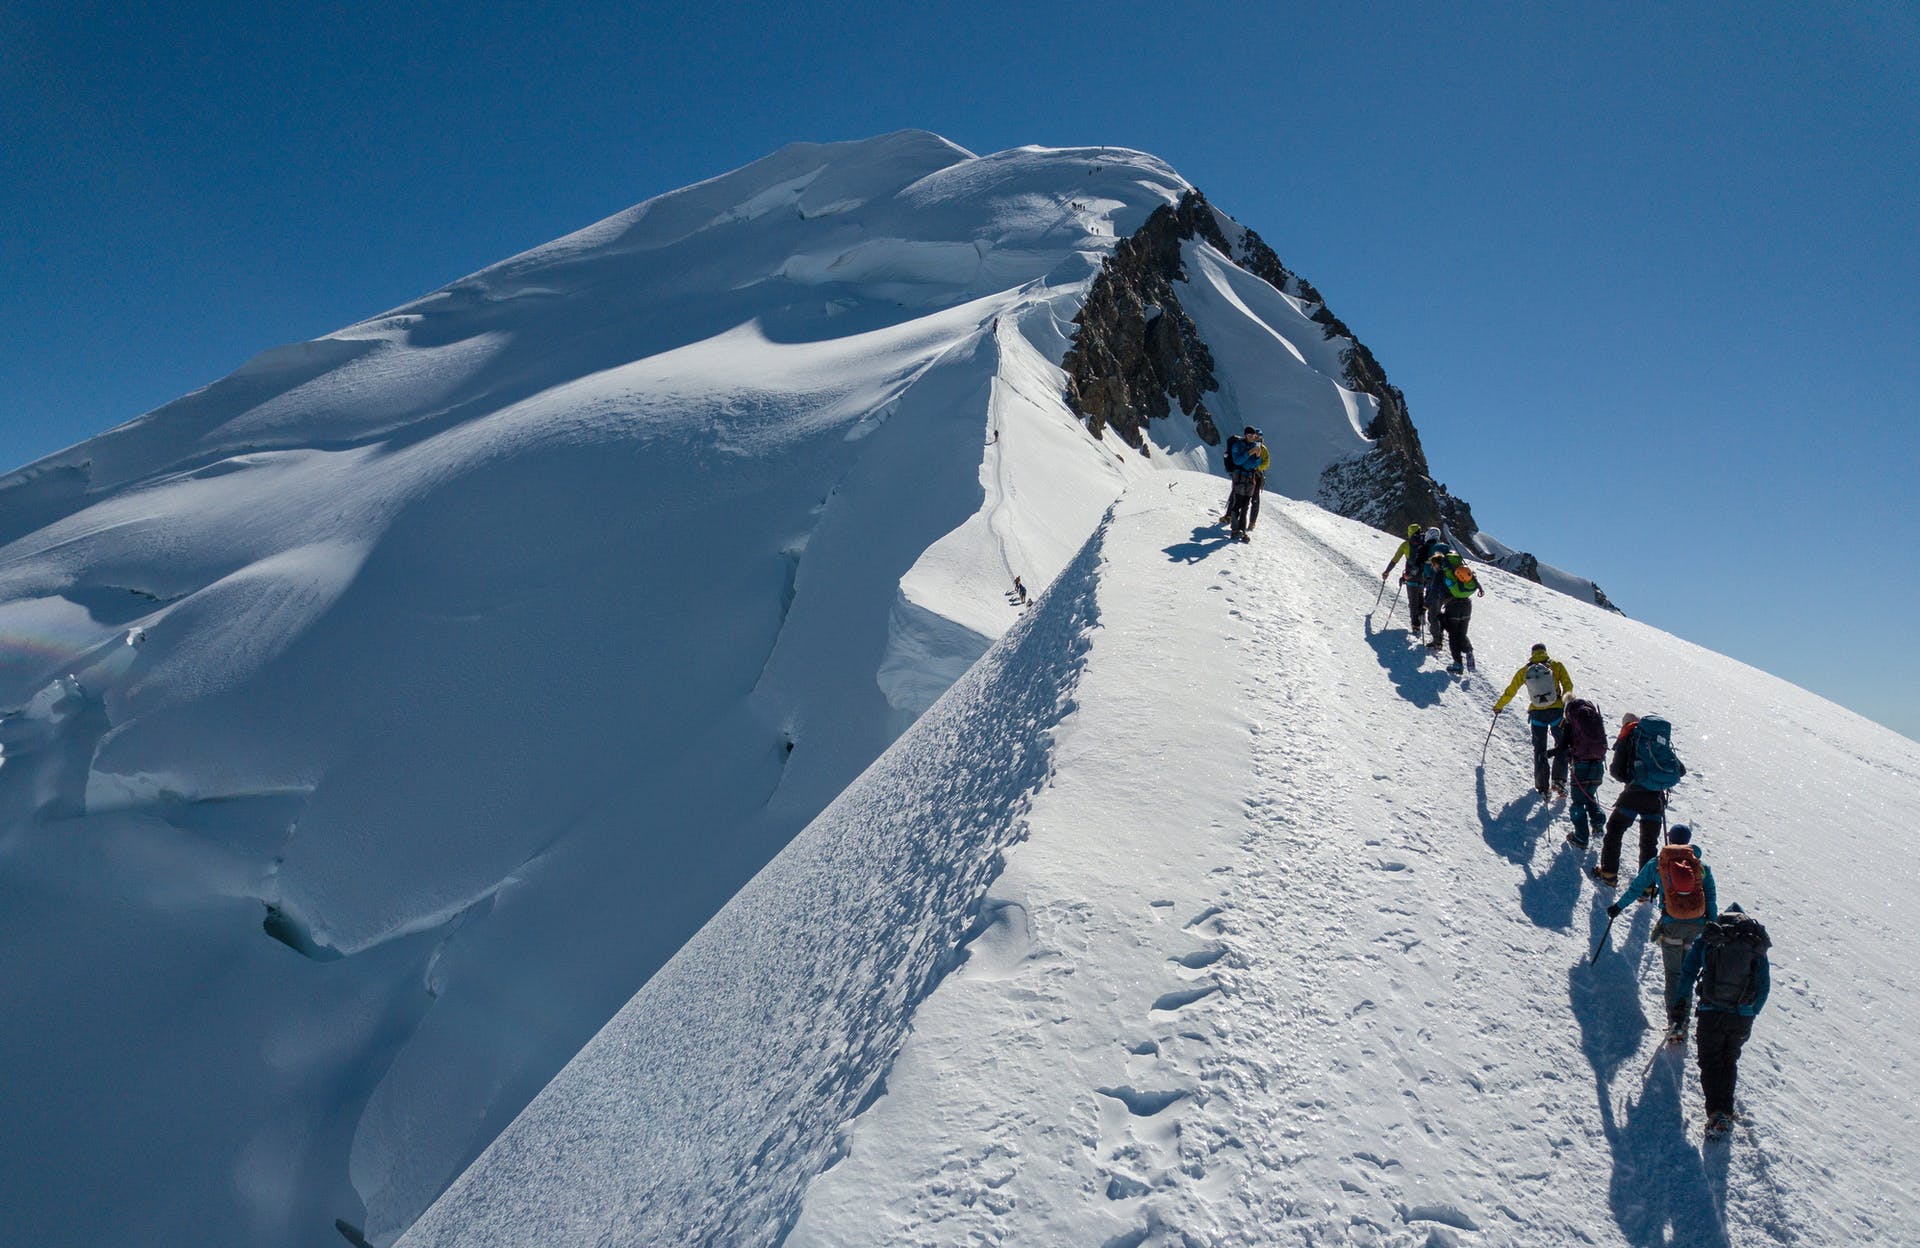 A hiking group climbing the snowy summit of Mont Blanc.